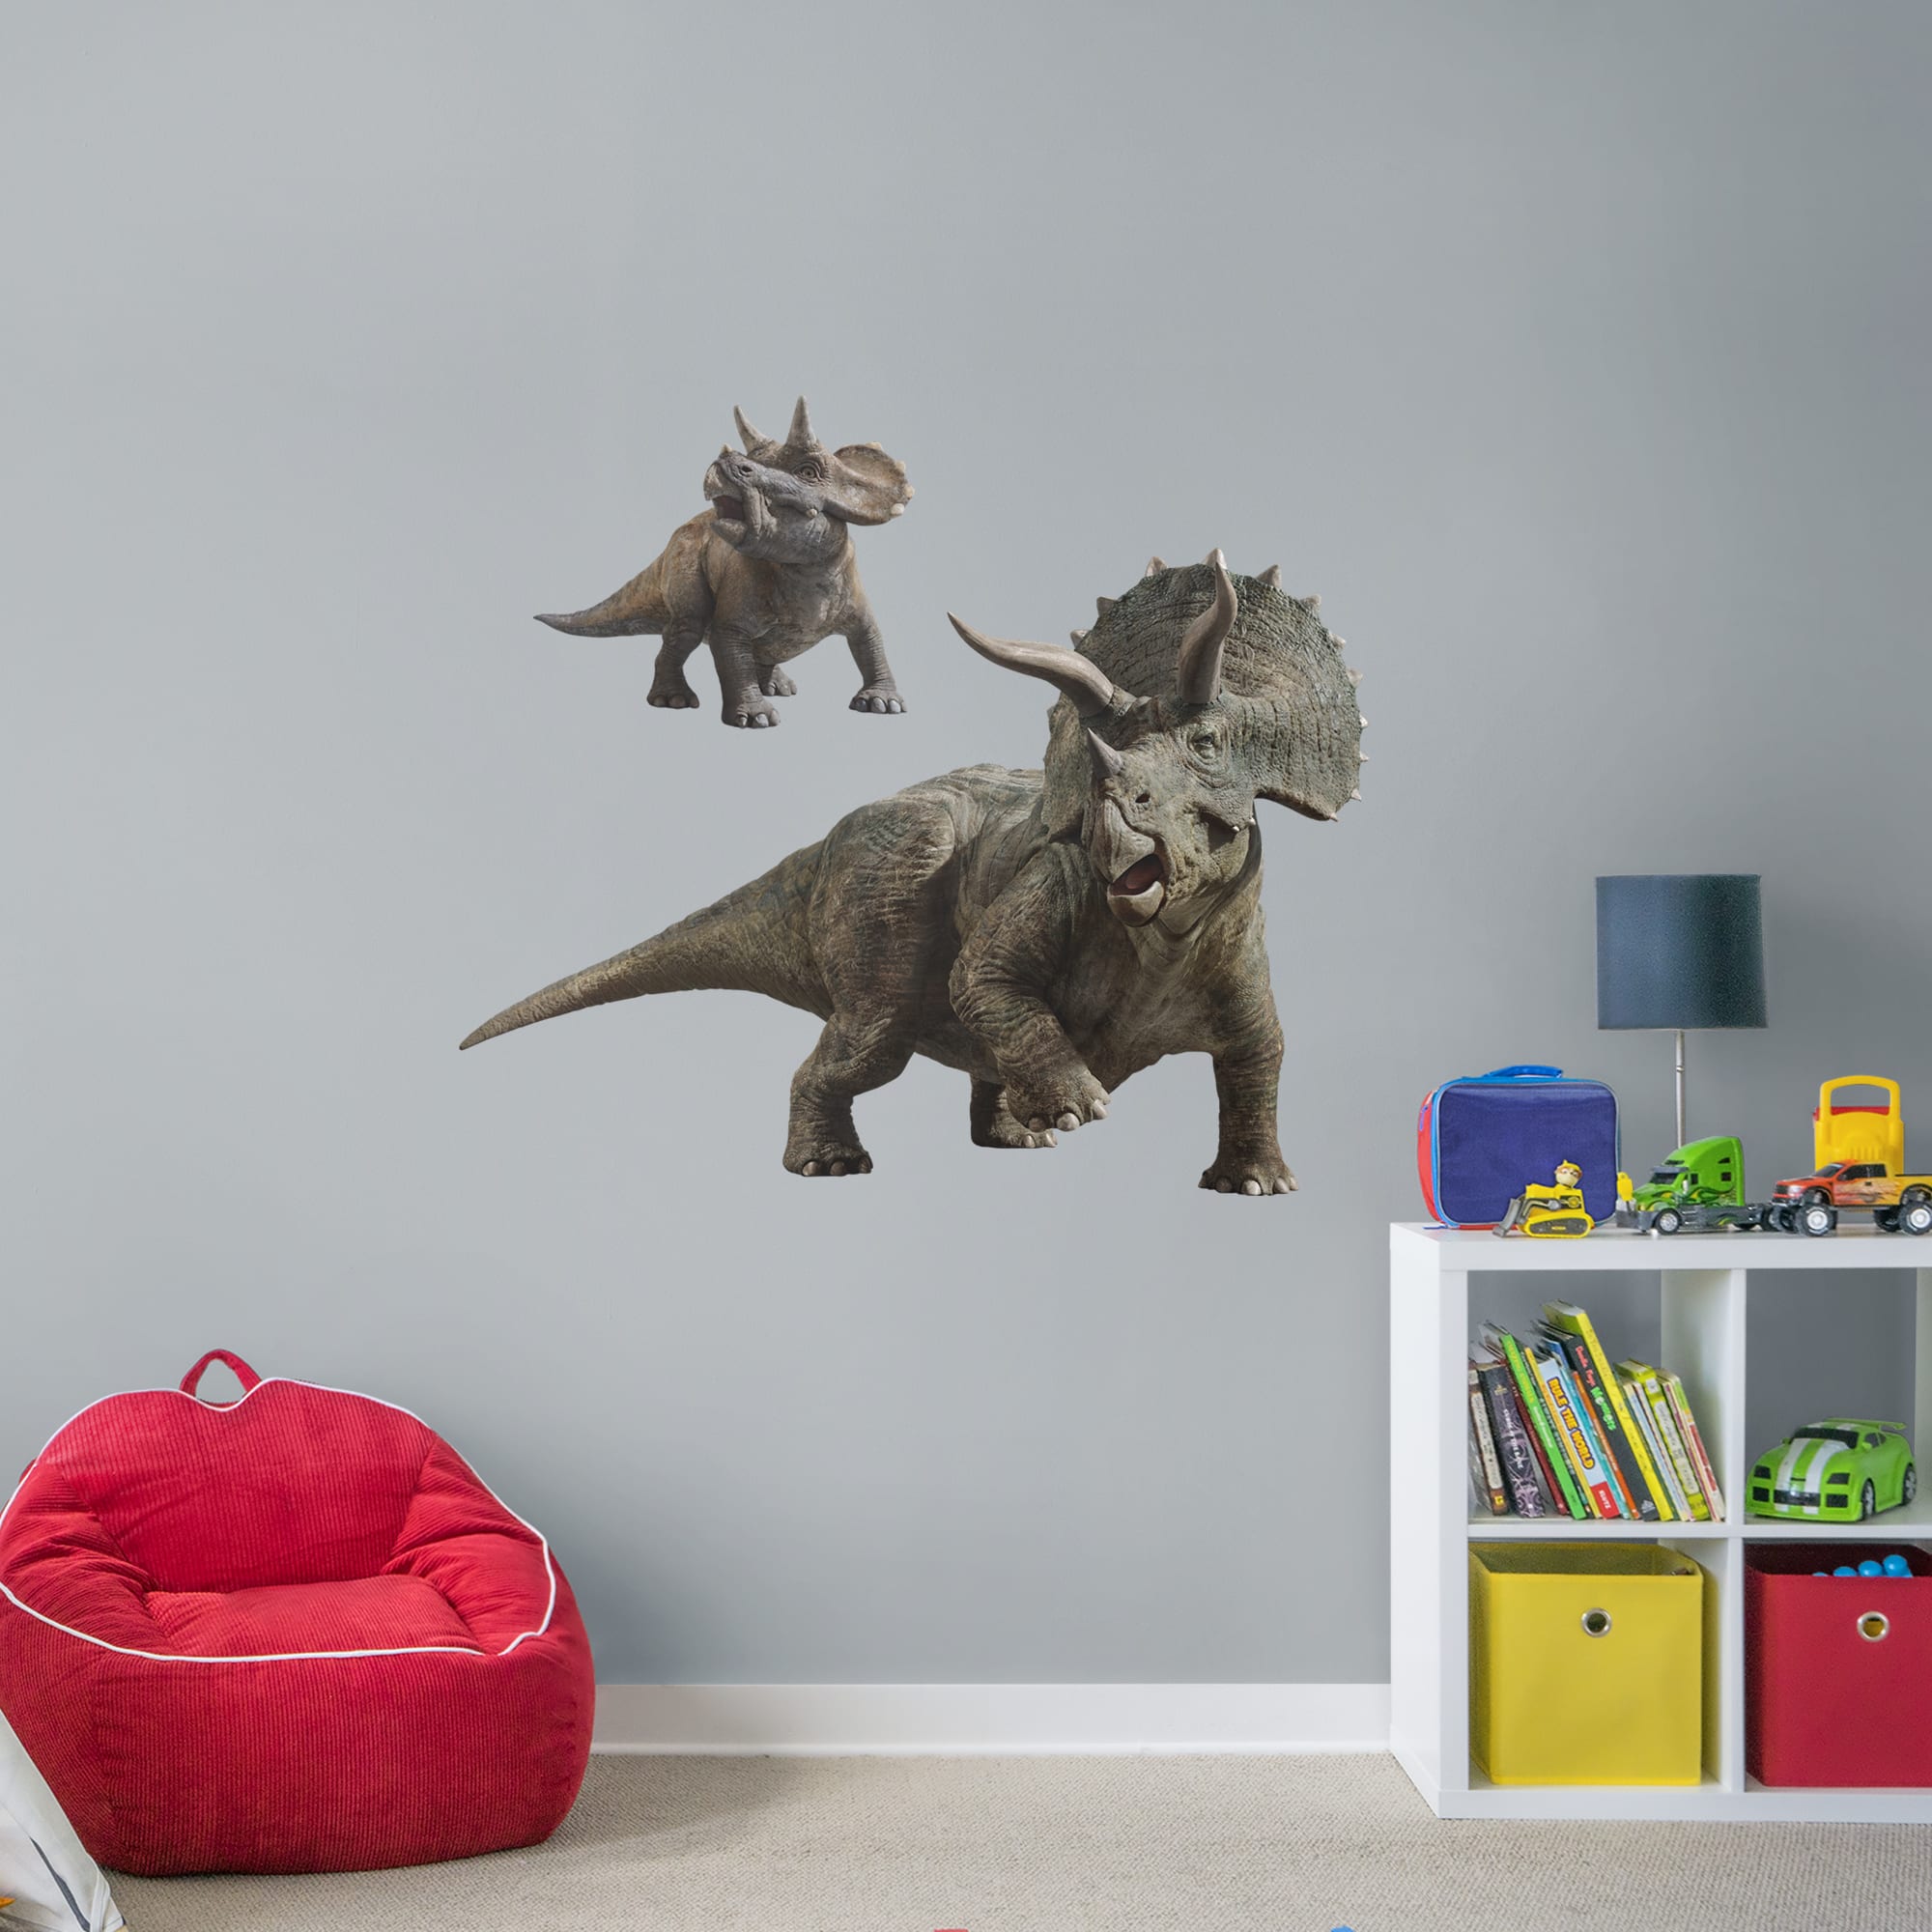 Triceratops - Jurassic World: Fallen Kingdom - Officially Licensed Removable Wall Decal Giant Character + 2 Decals (46"W x 33"H)